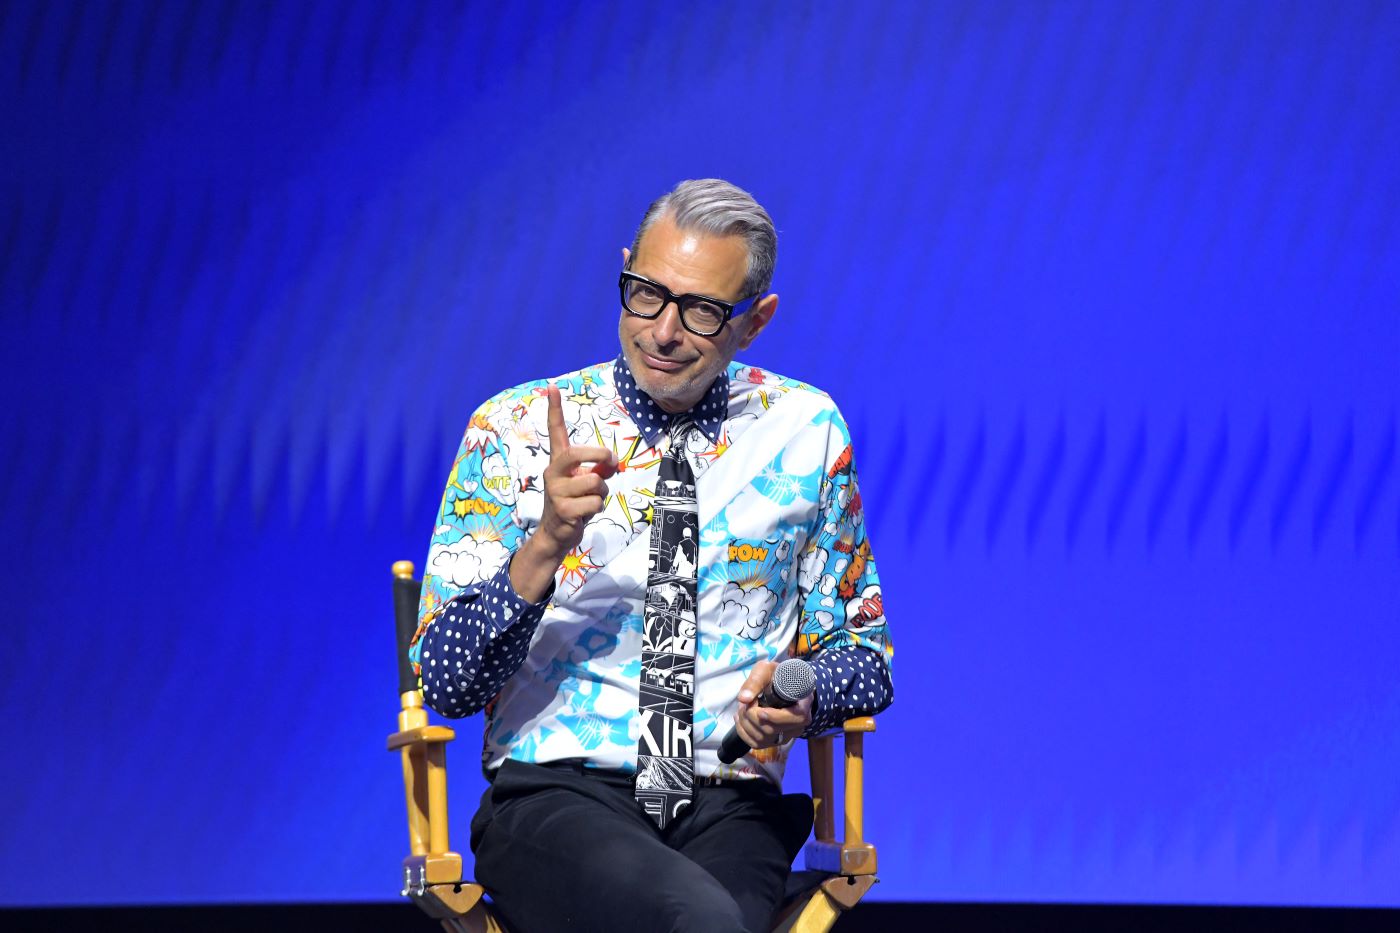 Jeff Goldblum in a very bold-patterned button-up shirt and tie with a dark blue long sleeve shirt underneath against a black background sitting in a director's chair in front of a blue background.